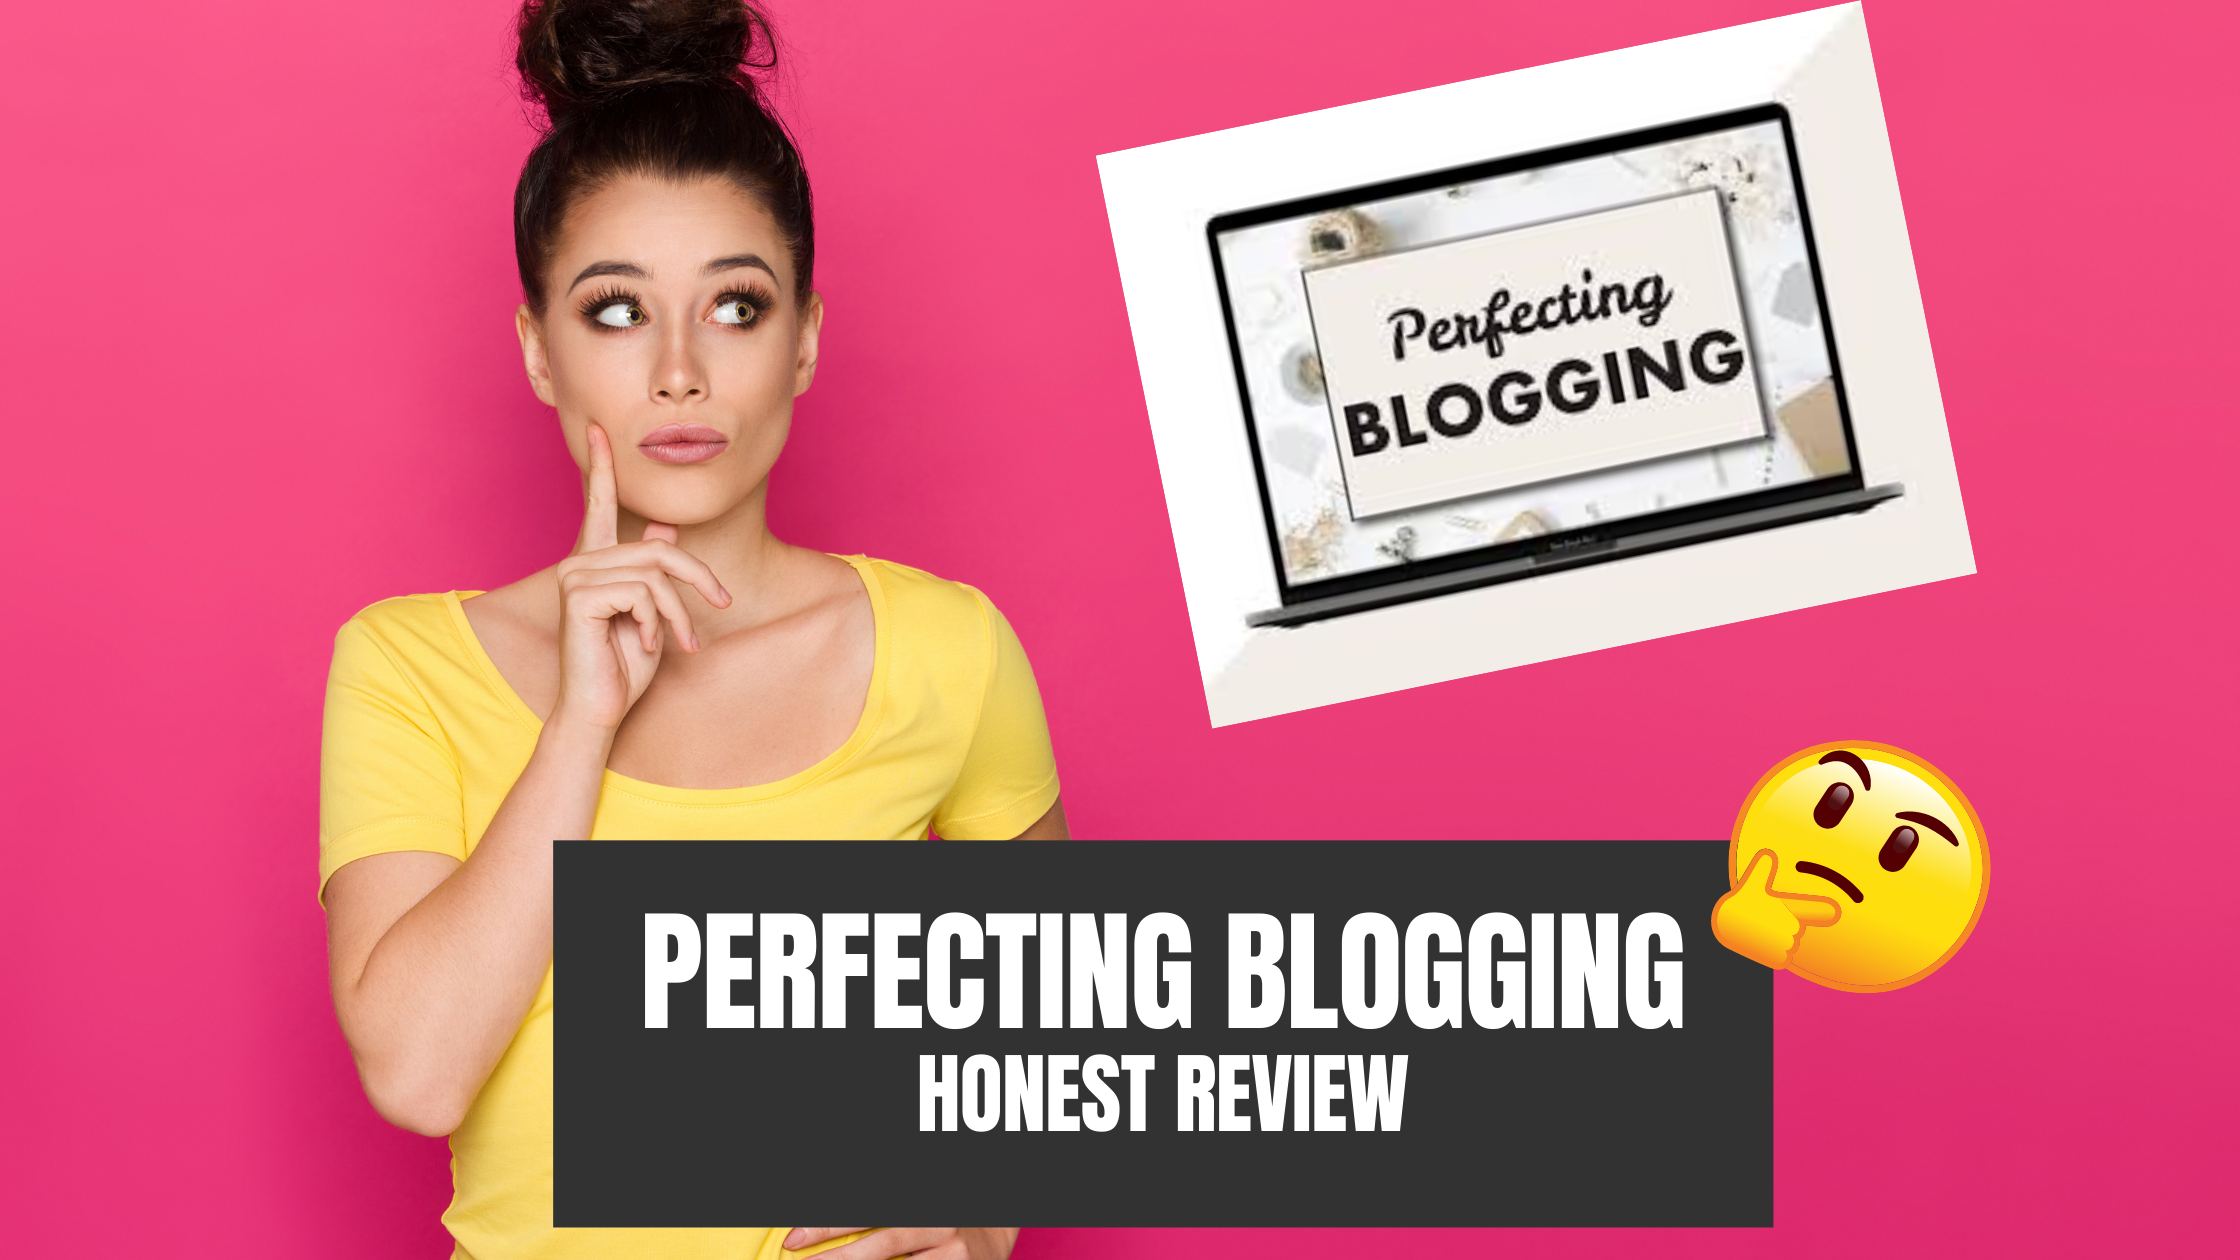 Review of “Perfecting Blogging” From By Sophia Lee